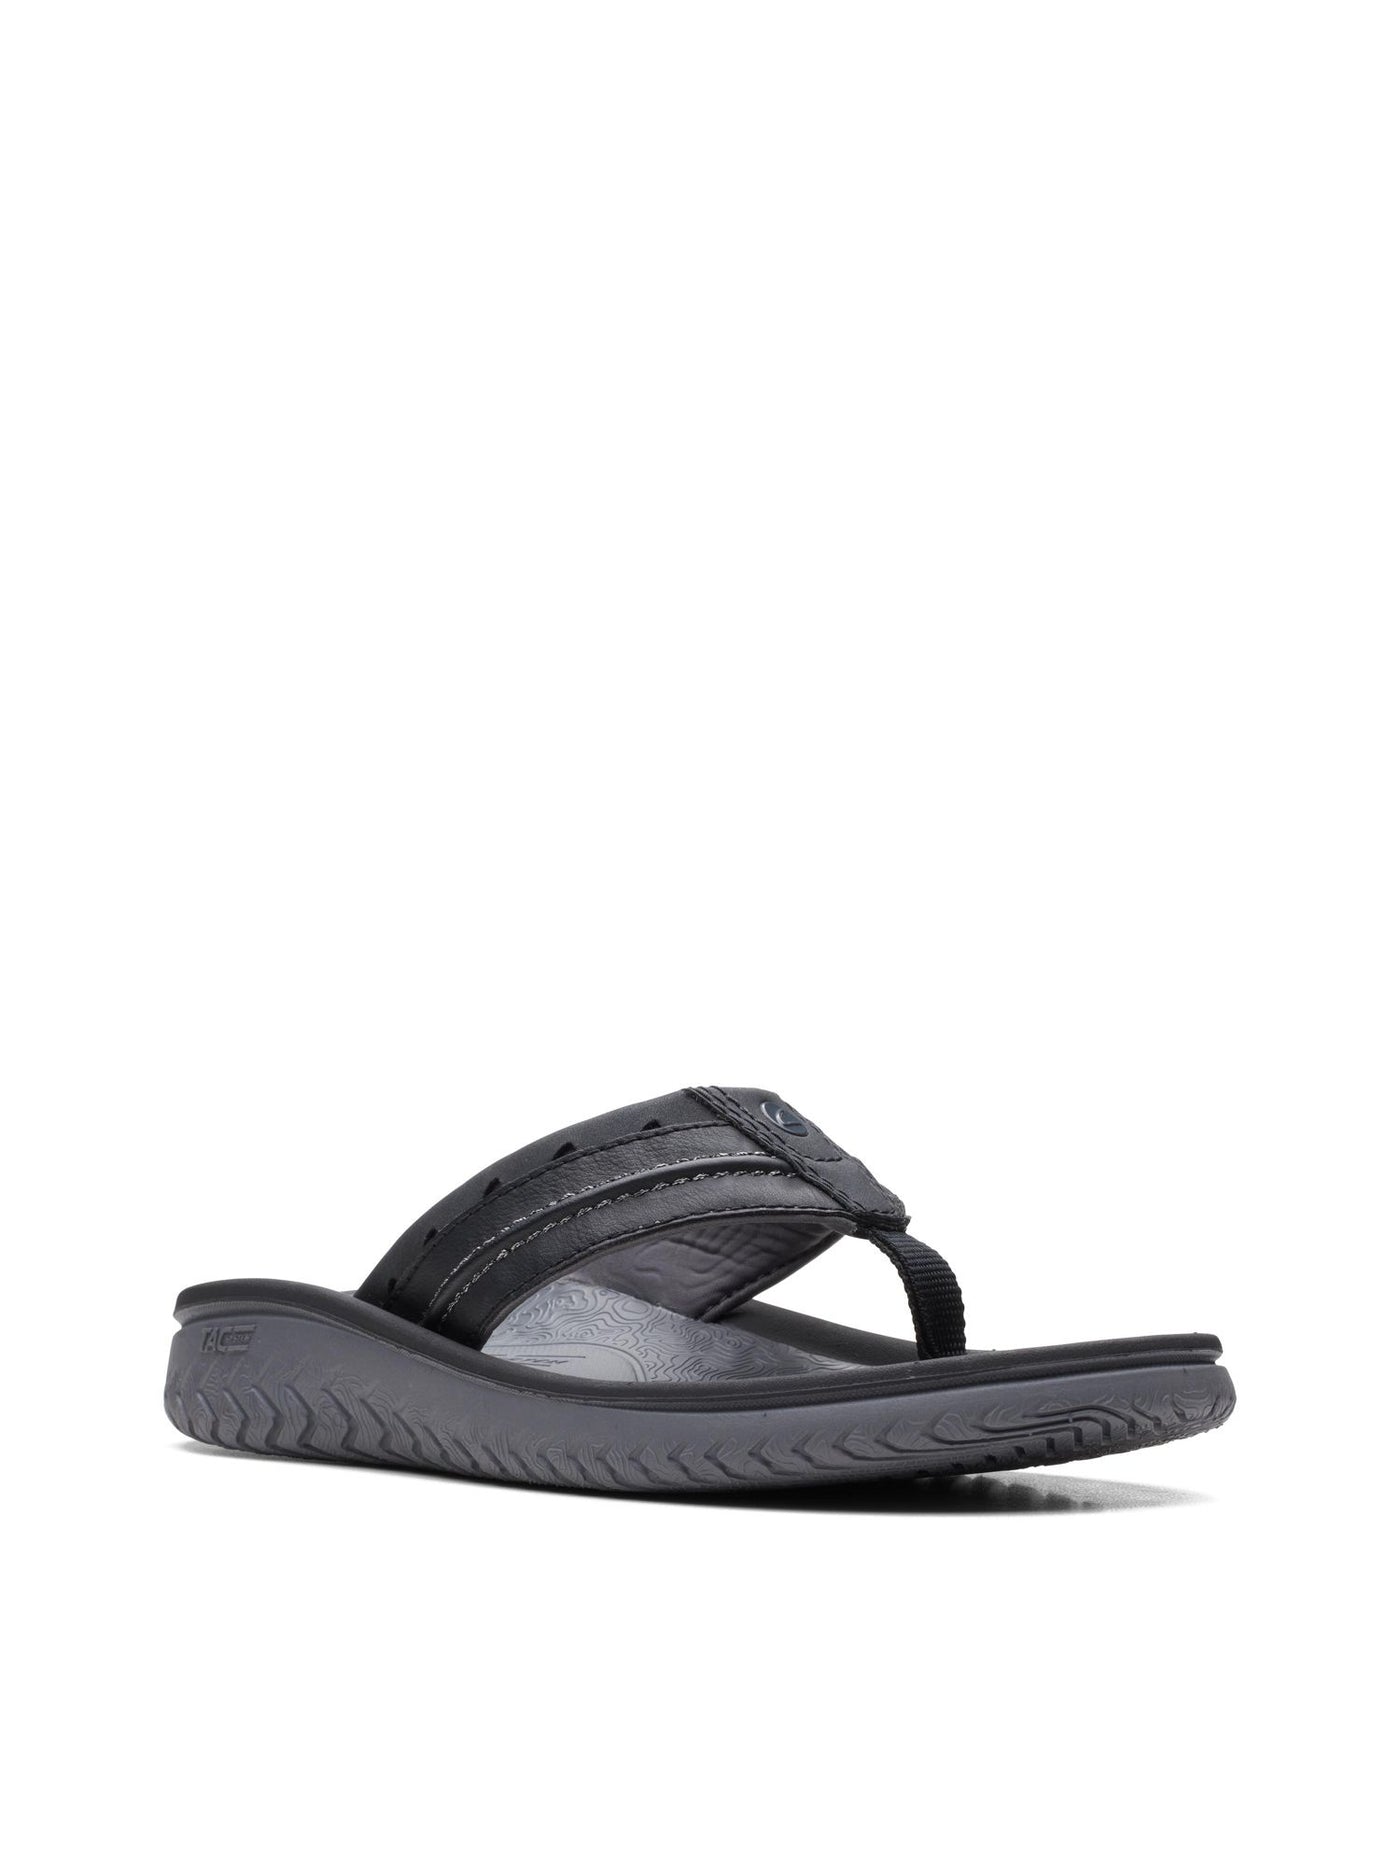 CLARKS COLLECTION Mens Black Trail-Inspired Treading Arch Support Lightweight Wesley Open Toe Slip On Thong Sandals Shoes 12 M